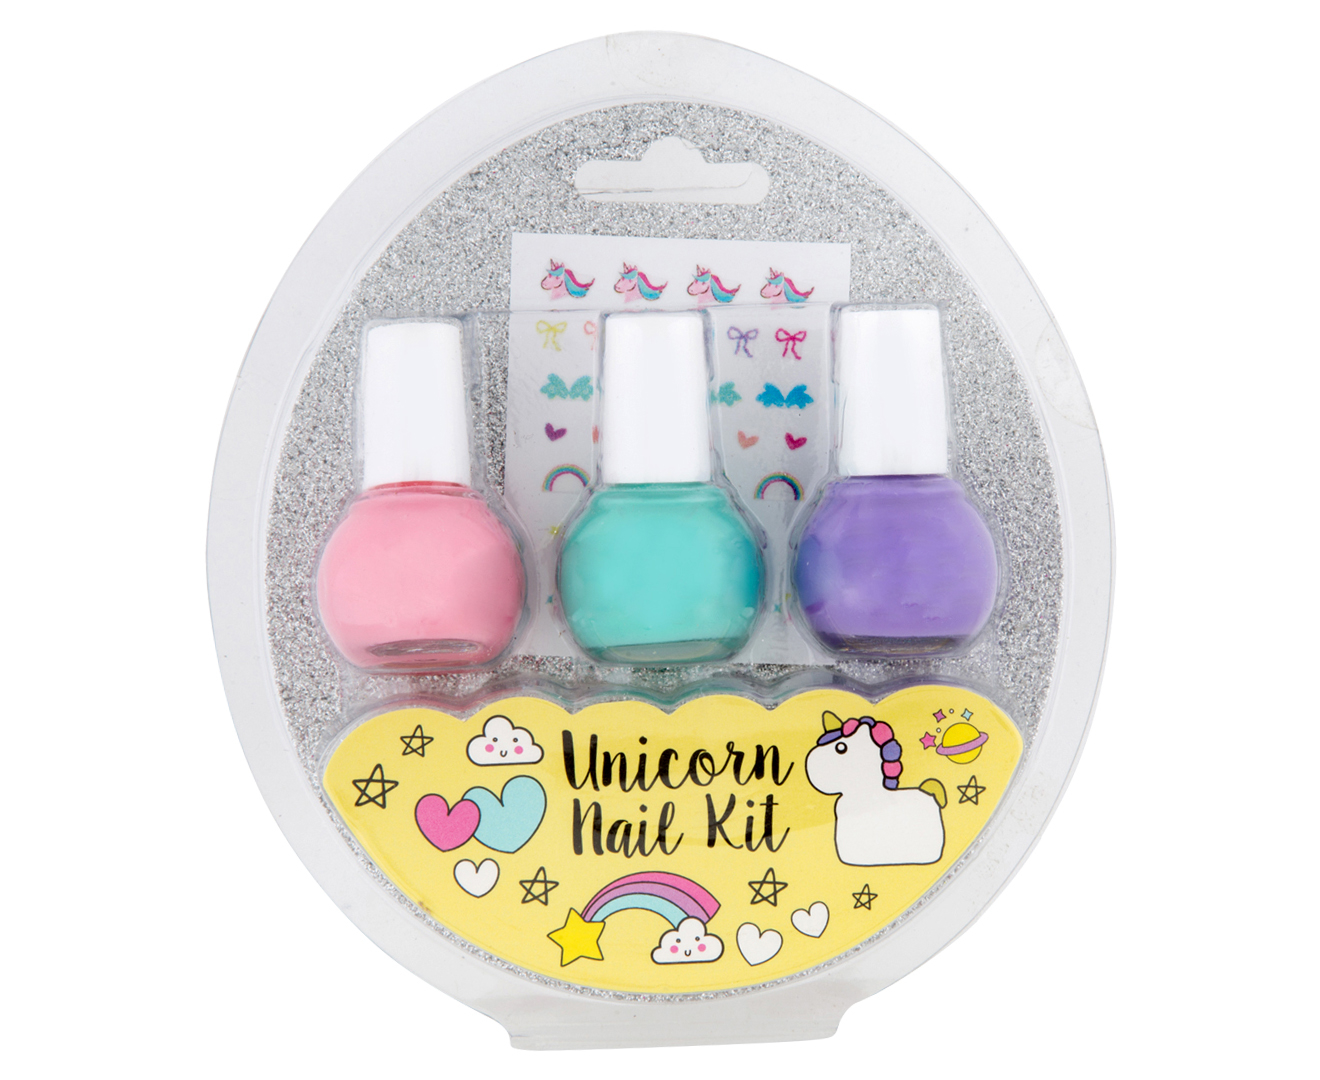 Nail Art Party Favors for Kids - wide 8